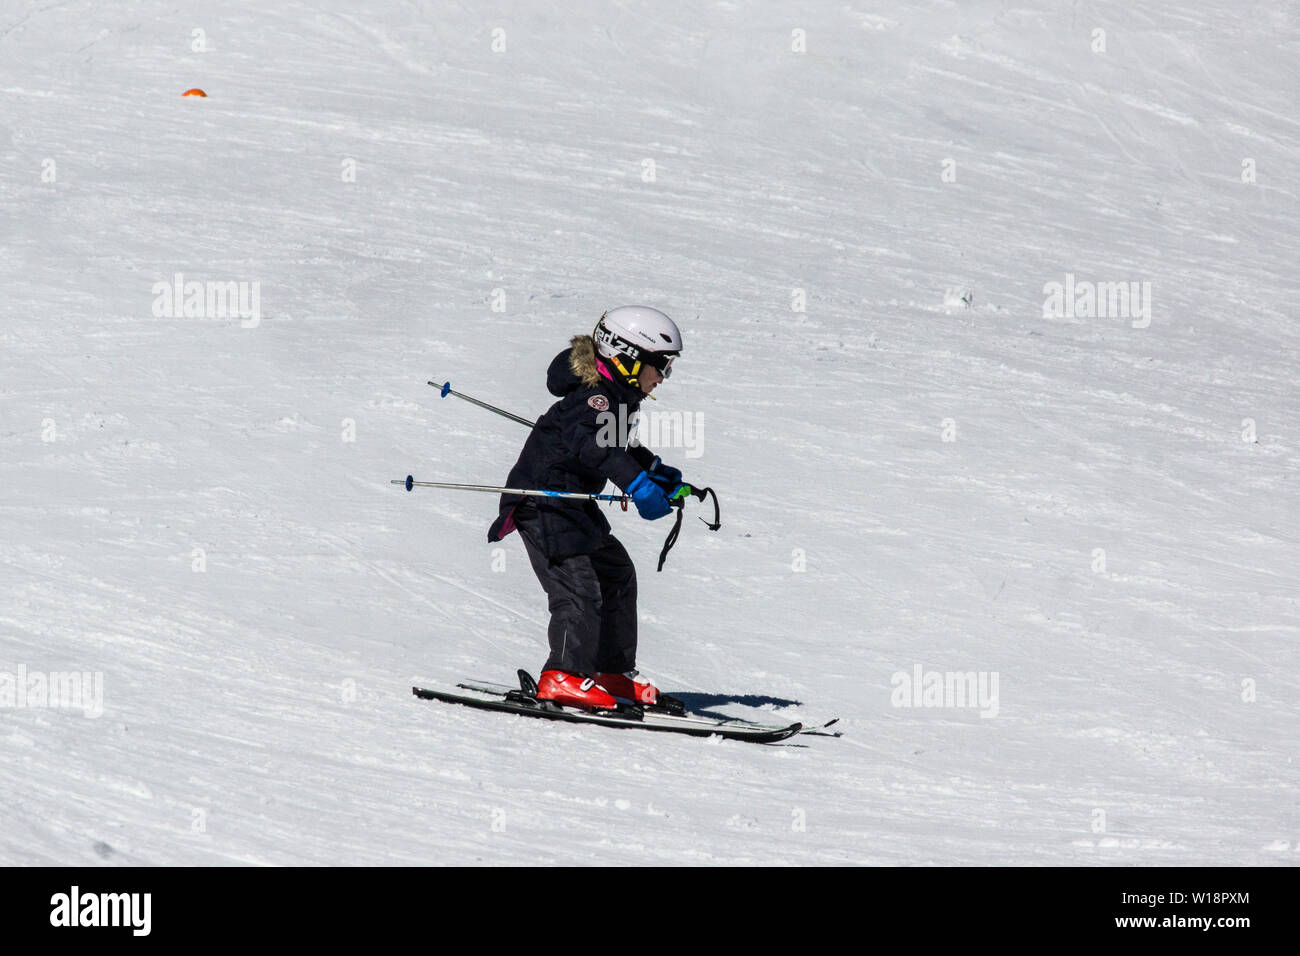 The central Pyrenees at Pont Espagne. Young girl learning to ski on the beginners slope.two sticks. Stock Photo